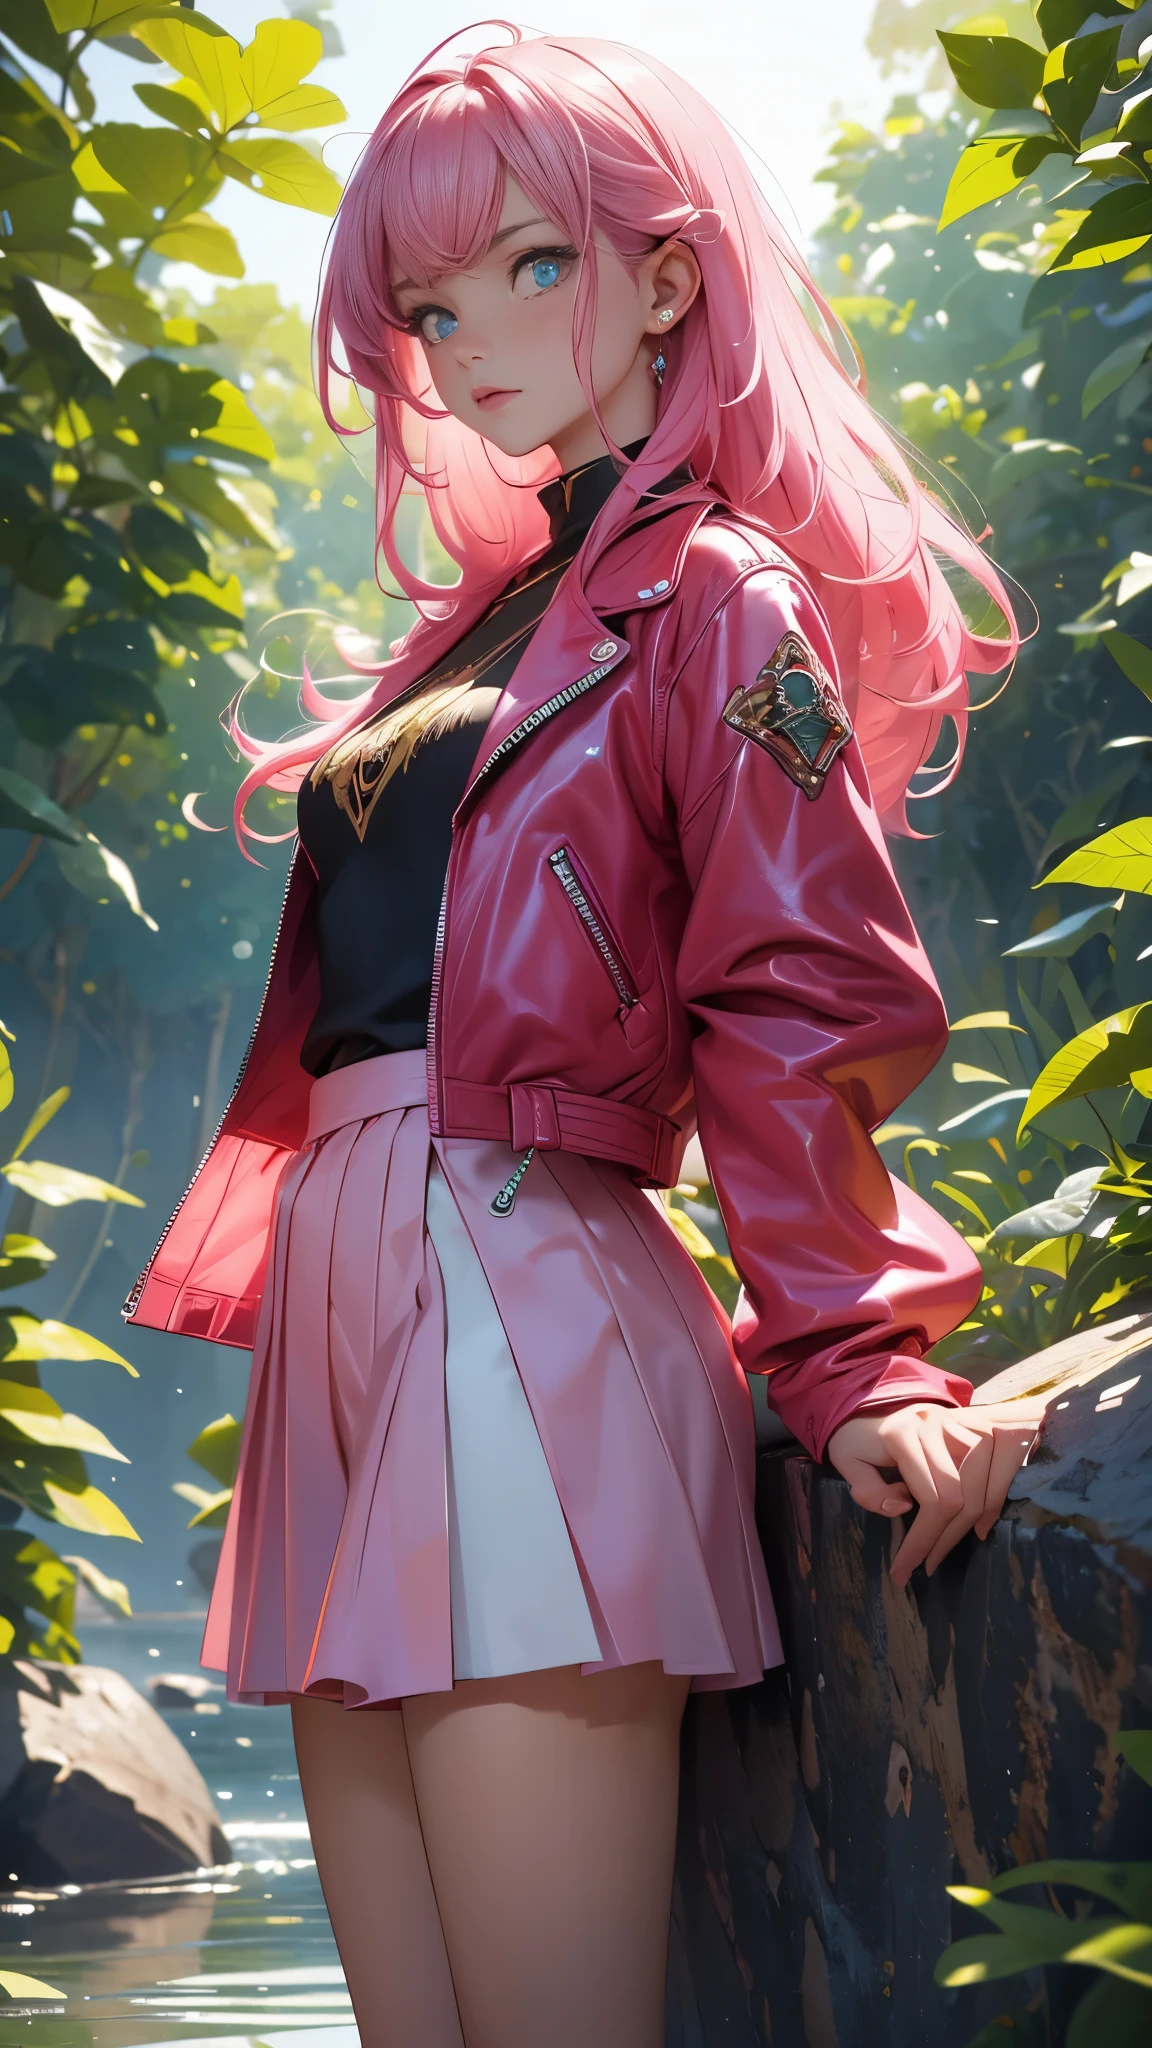 Pink，Vibrant colorasterpiece），（（（Top quality））），（（（Super detailed information）），（Surreal），（Highly detailed CG illustrations），Official Official Art，midsummer，Fashion， Honor, 1980, brutal beauty, gorgeous, gorgeous colorful hair, rock music, rock music, leather jackets, , the only perfect angle of women, perfect composition, perfect composition,